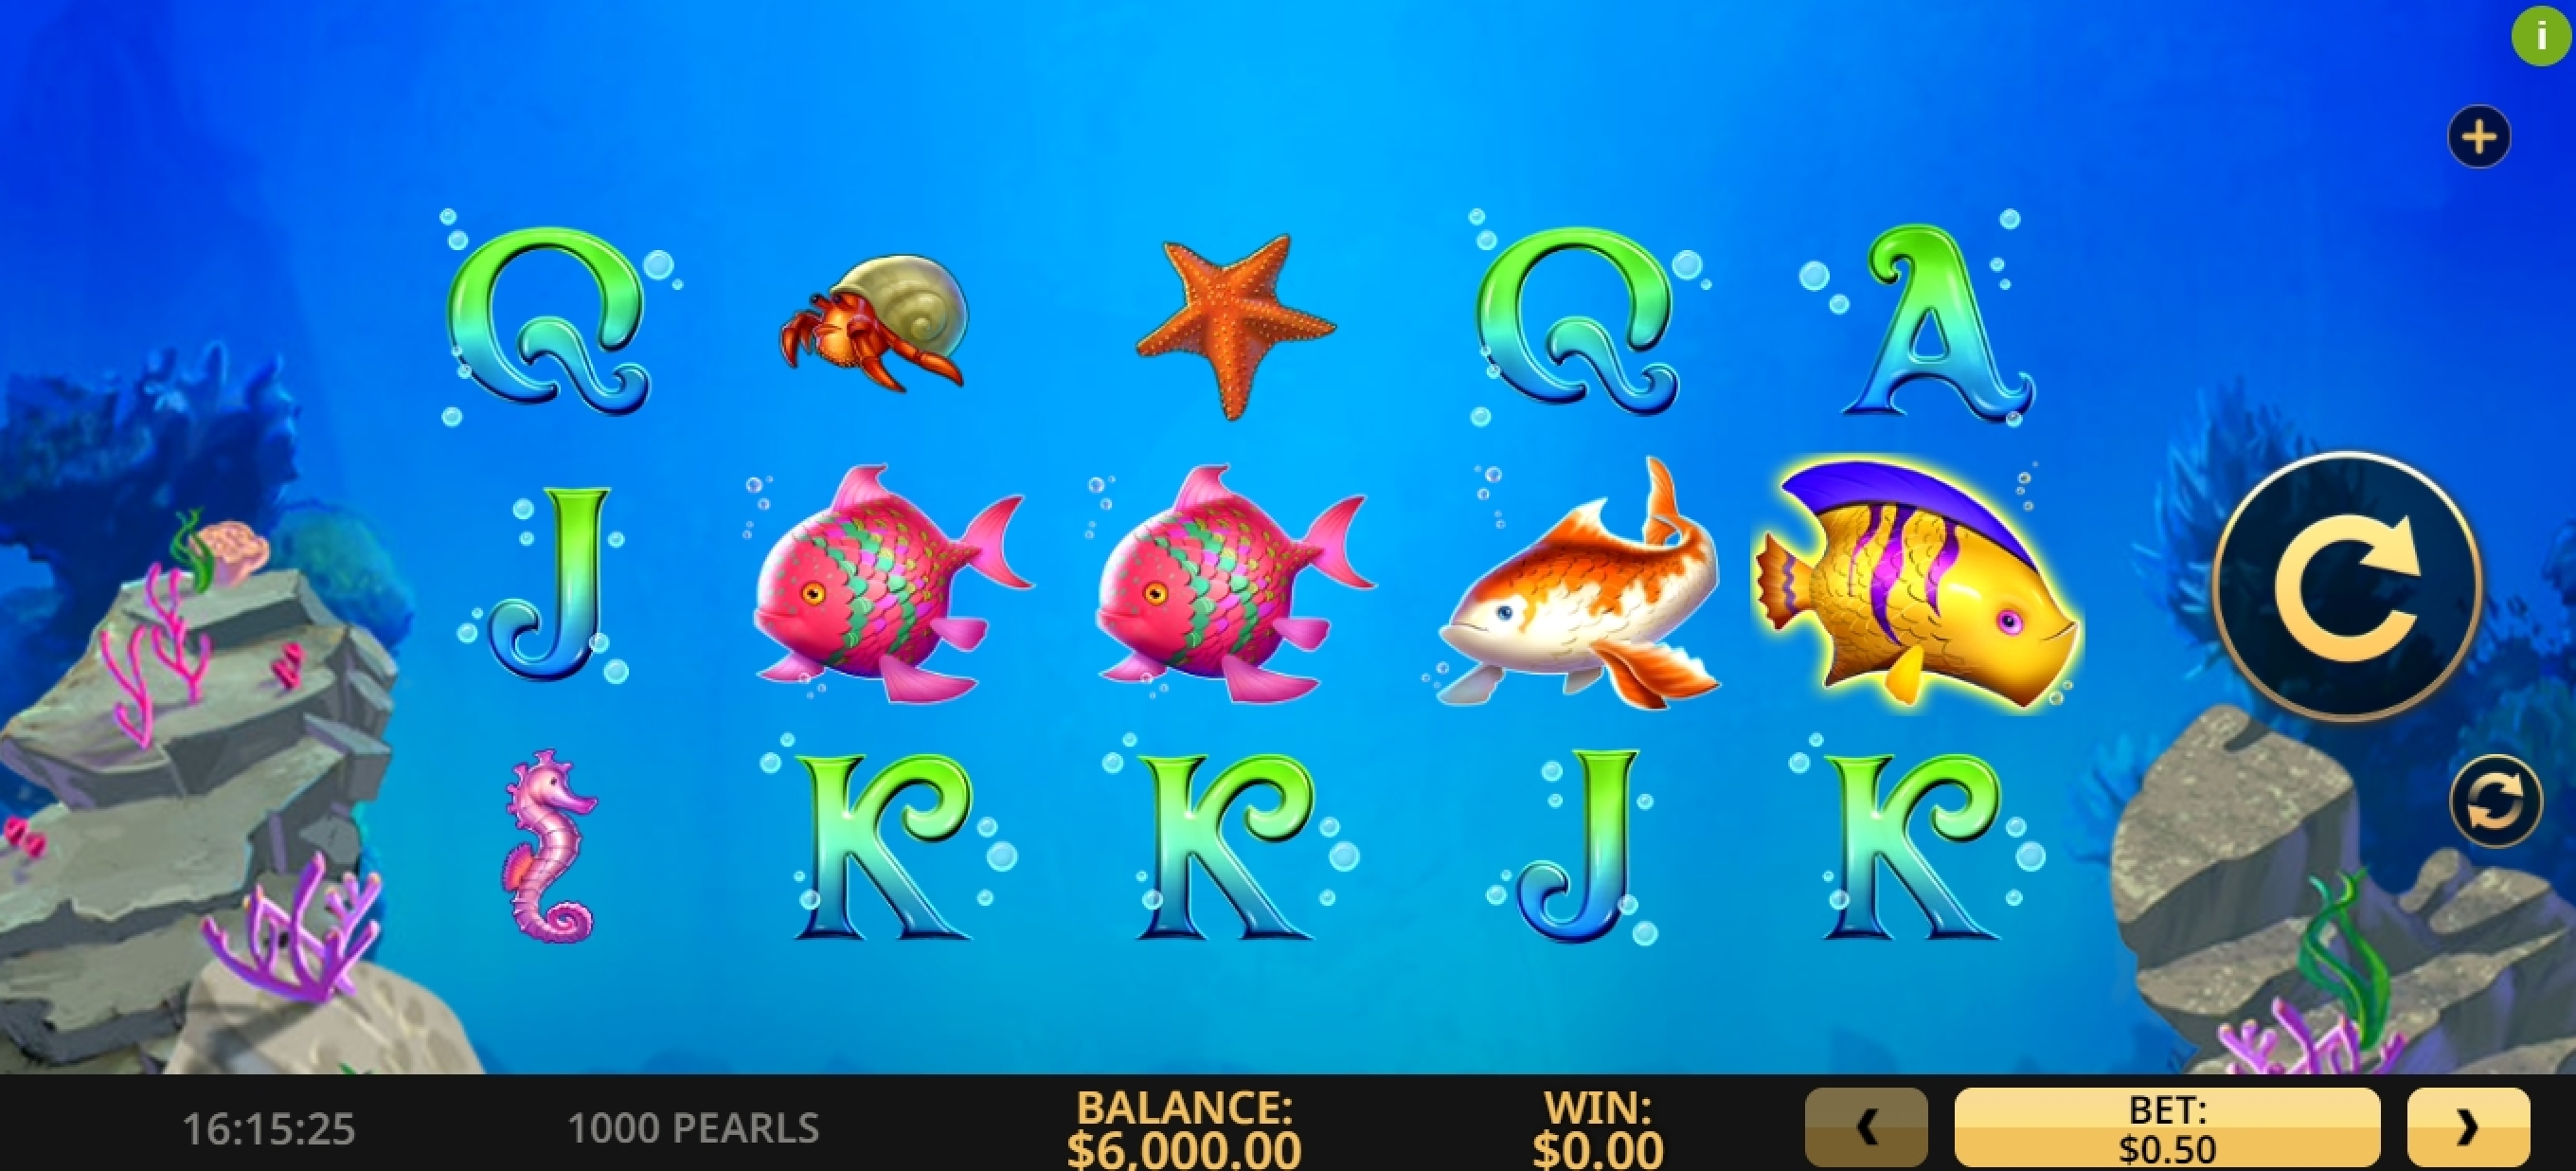 Reels in 1000 Pearls Slot Game by High 5 Games